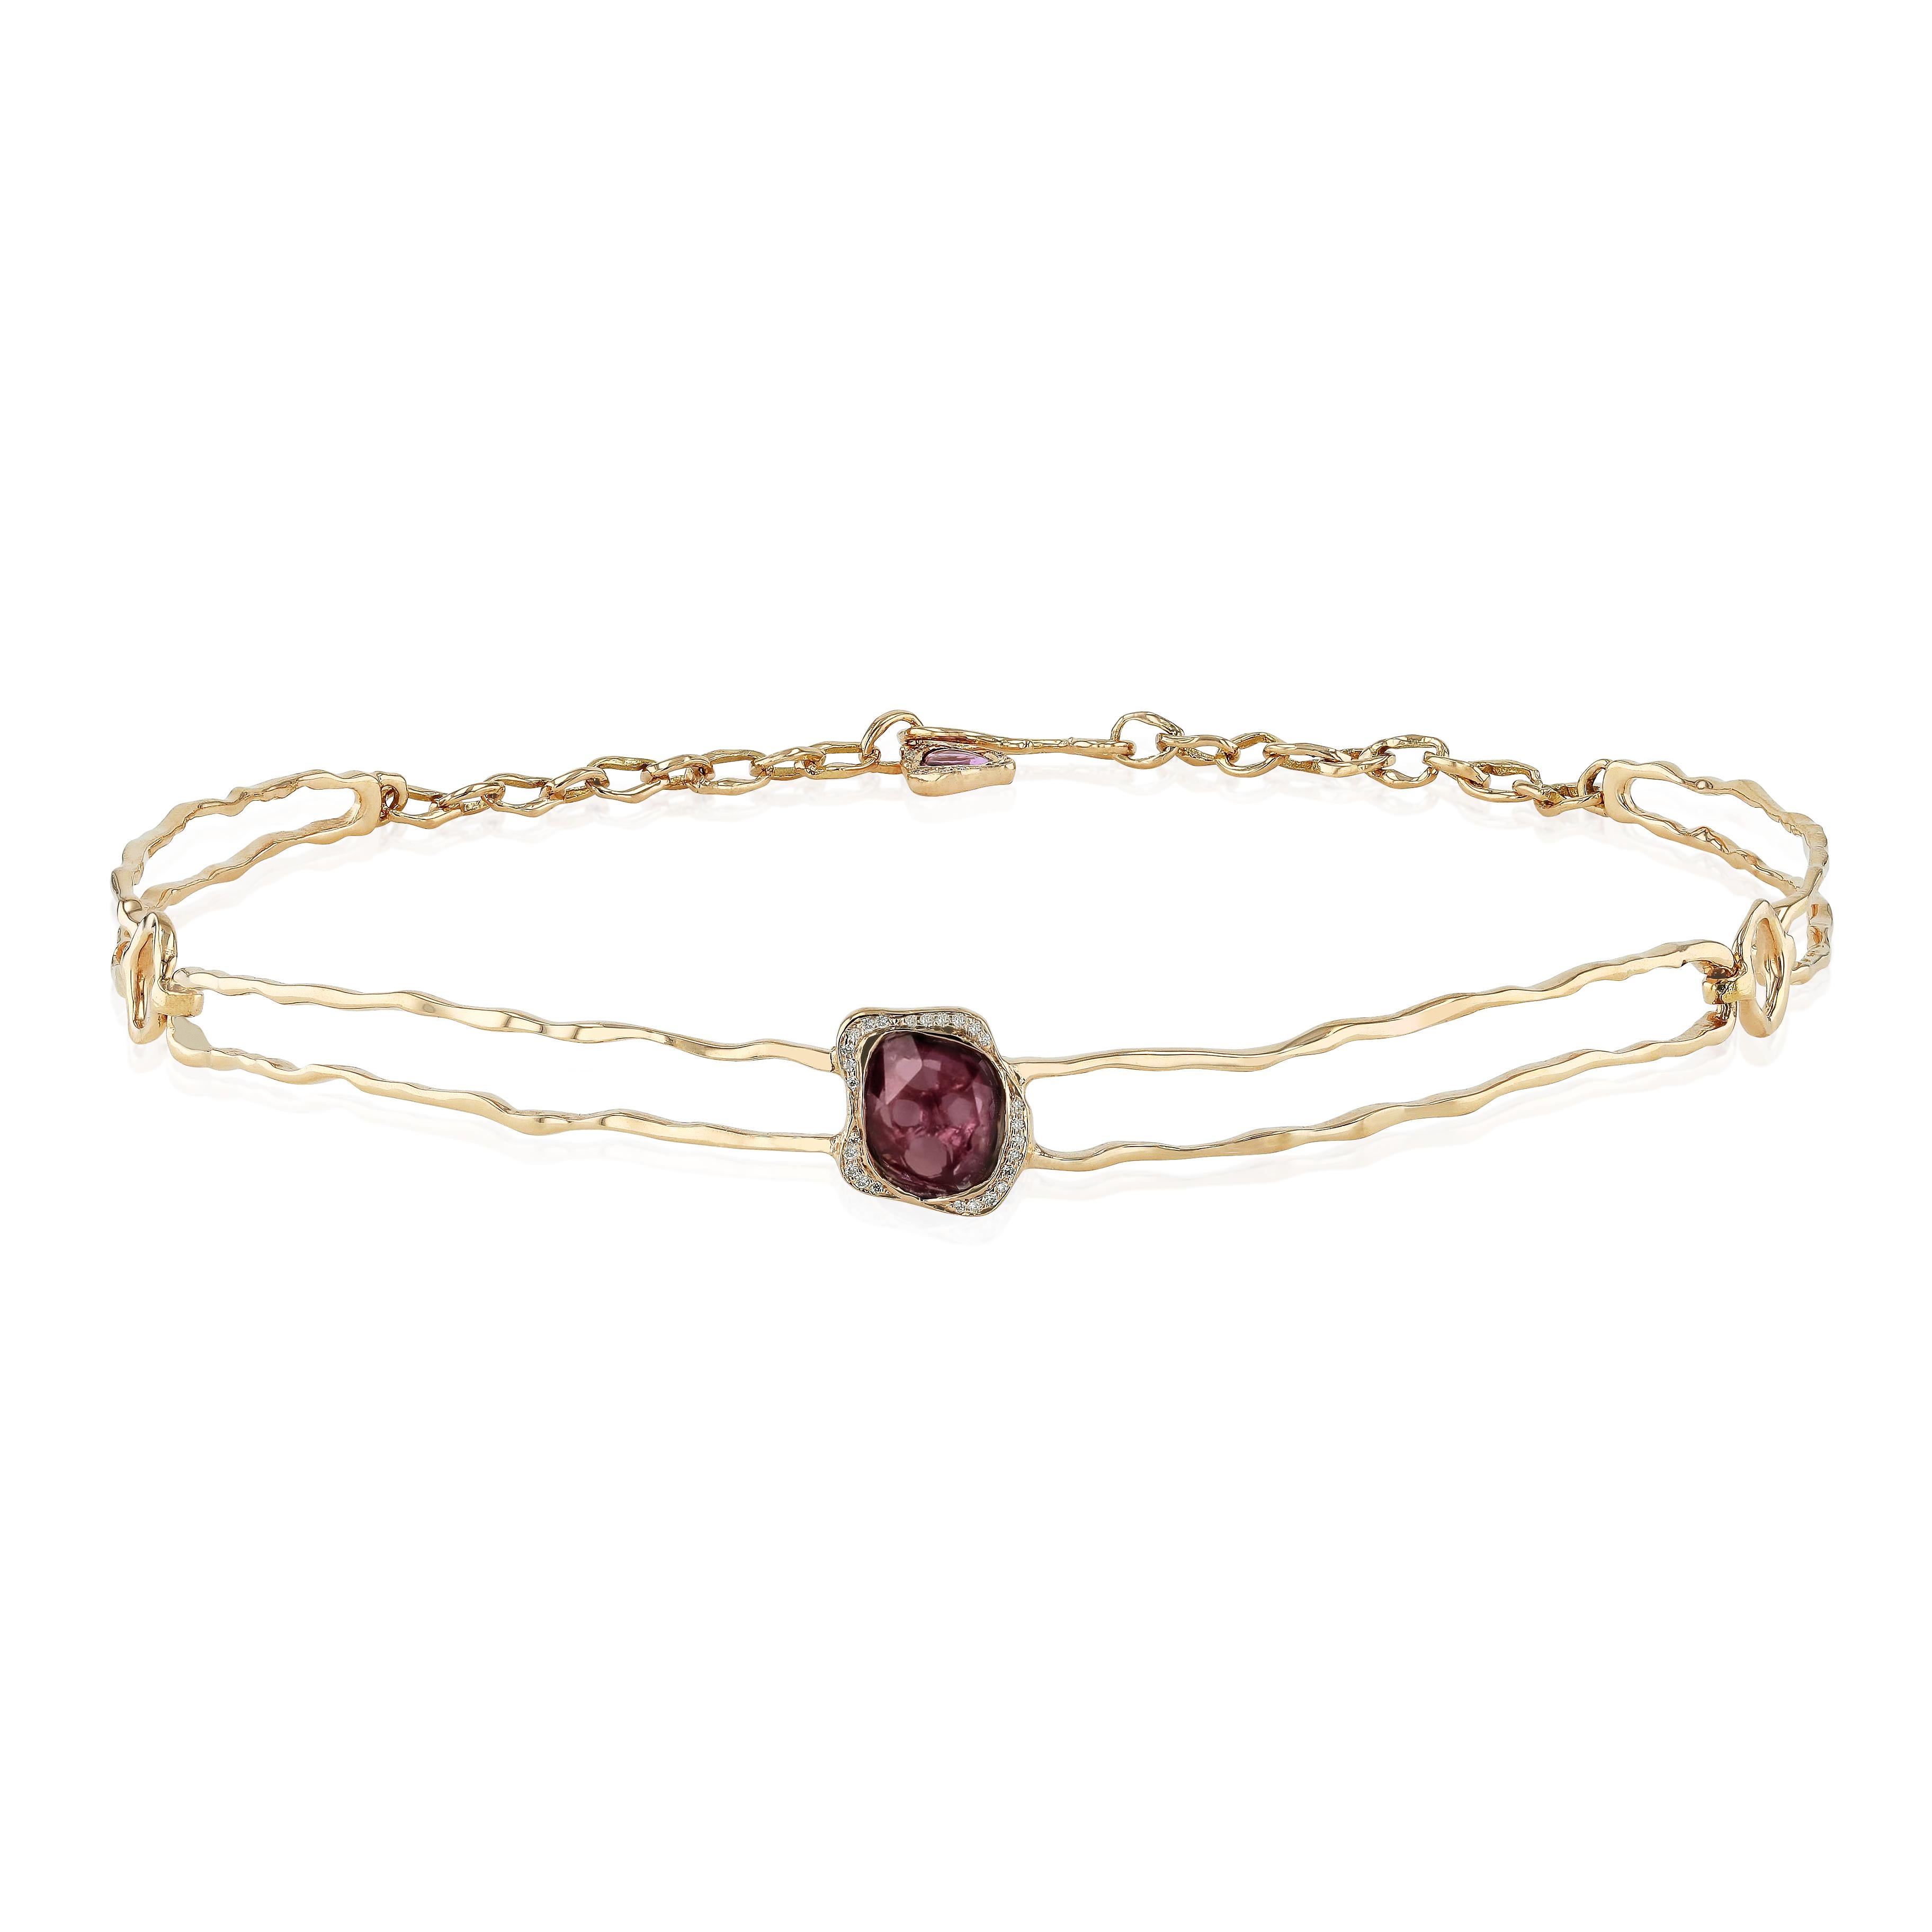 Serpentine lines are adorned with pavé white diamonds and pink sapphires appear in a very elegant way in this choker, it is designed with simplicity and passion. This choker will add a feminine touch to an everyday look. 
Diamonds (Total Carat